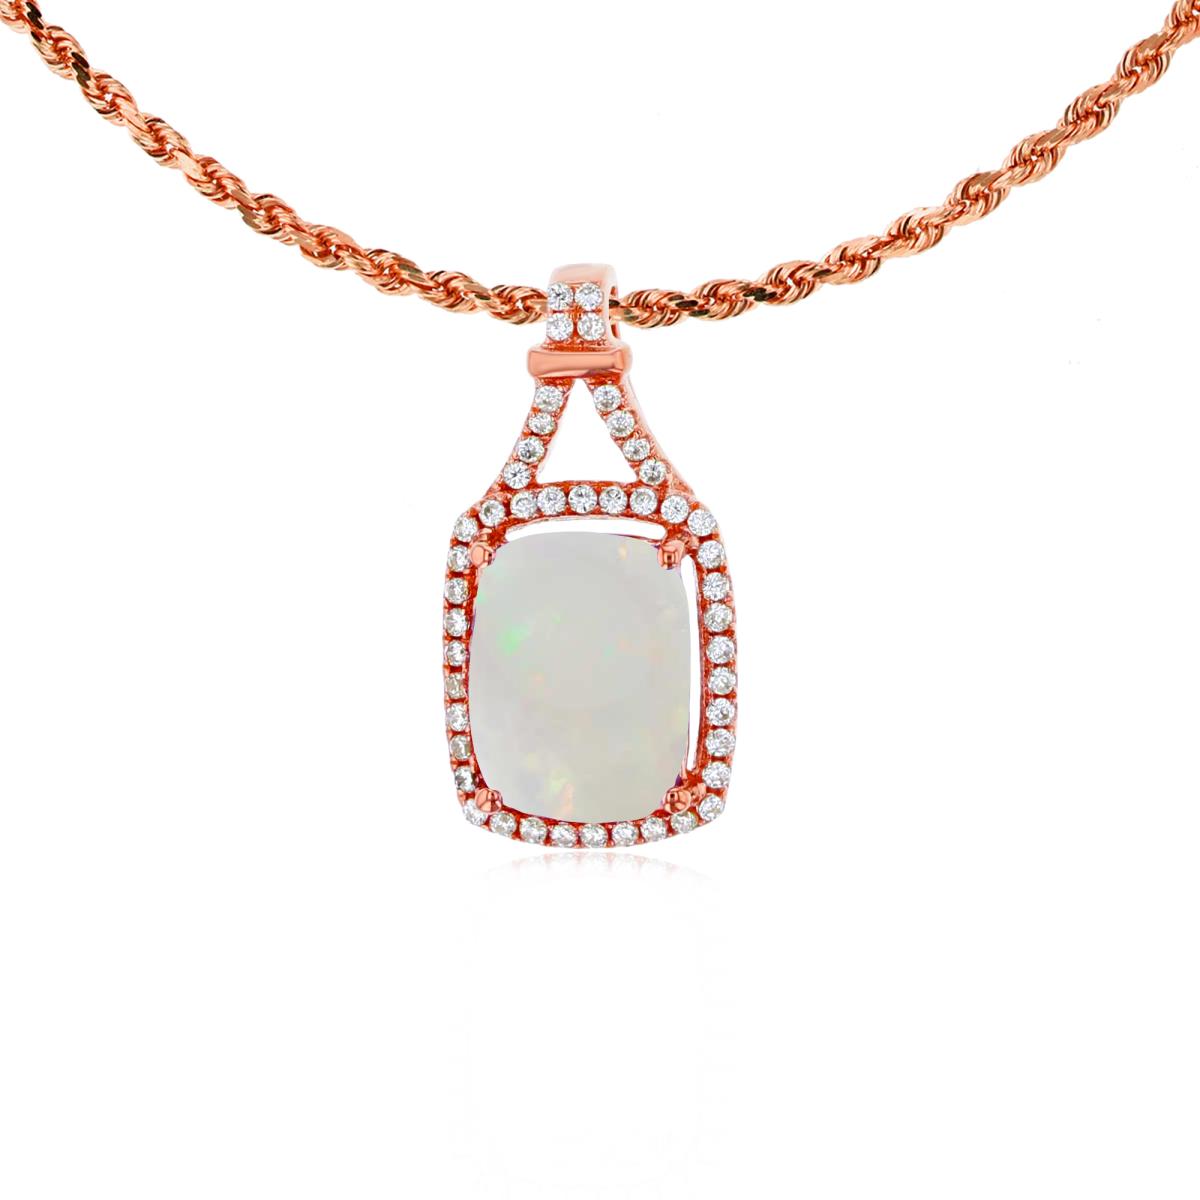 10K Rose Gold 8x6mm Cushion Opal & 0.13 CTTW Rd Diamonds Halo 18" Rope Chain Necklace